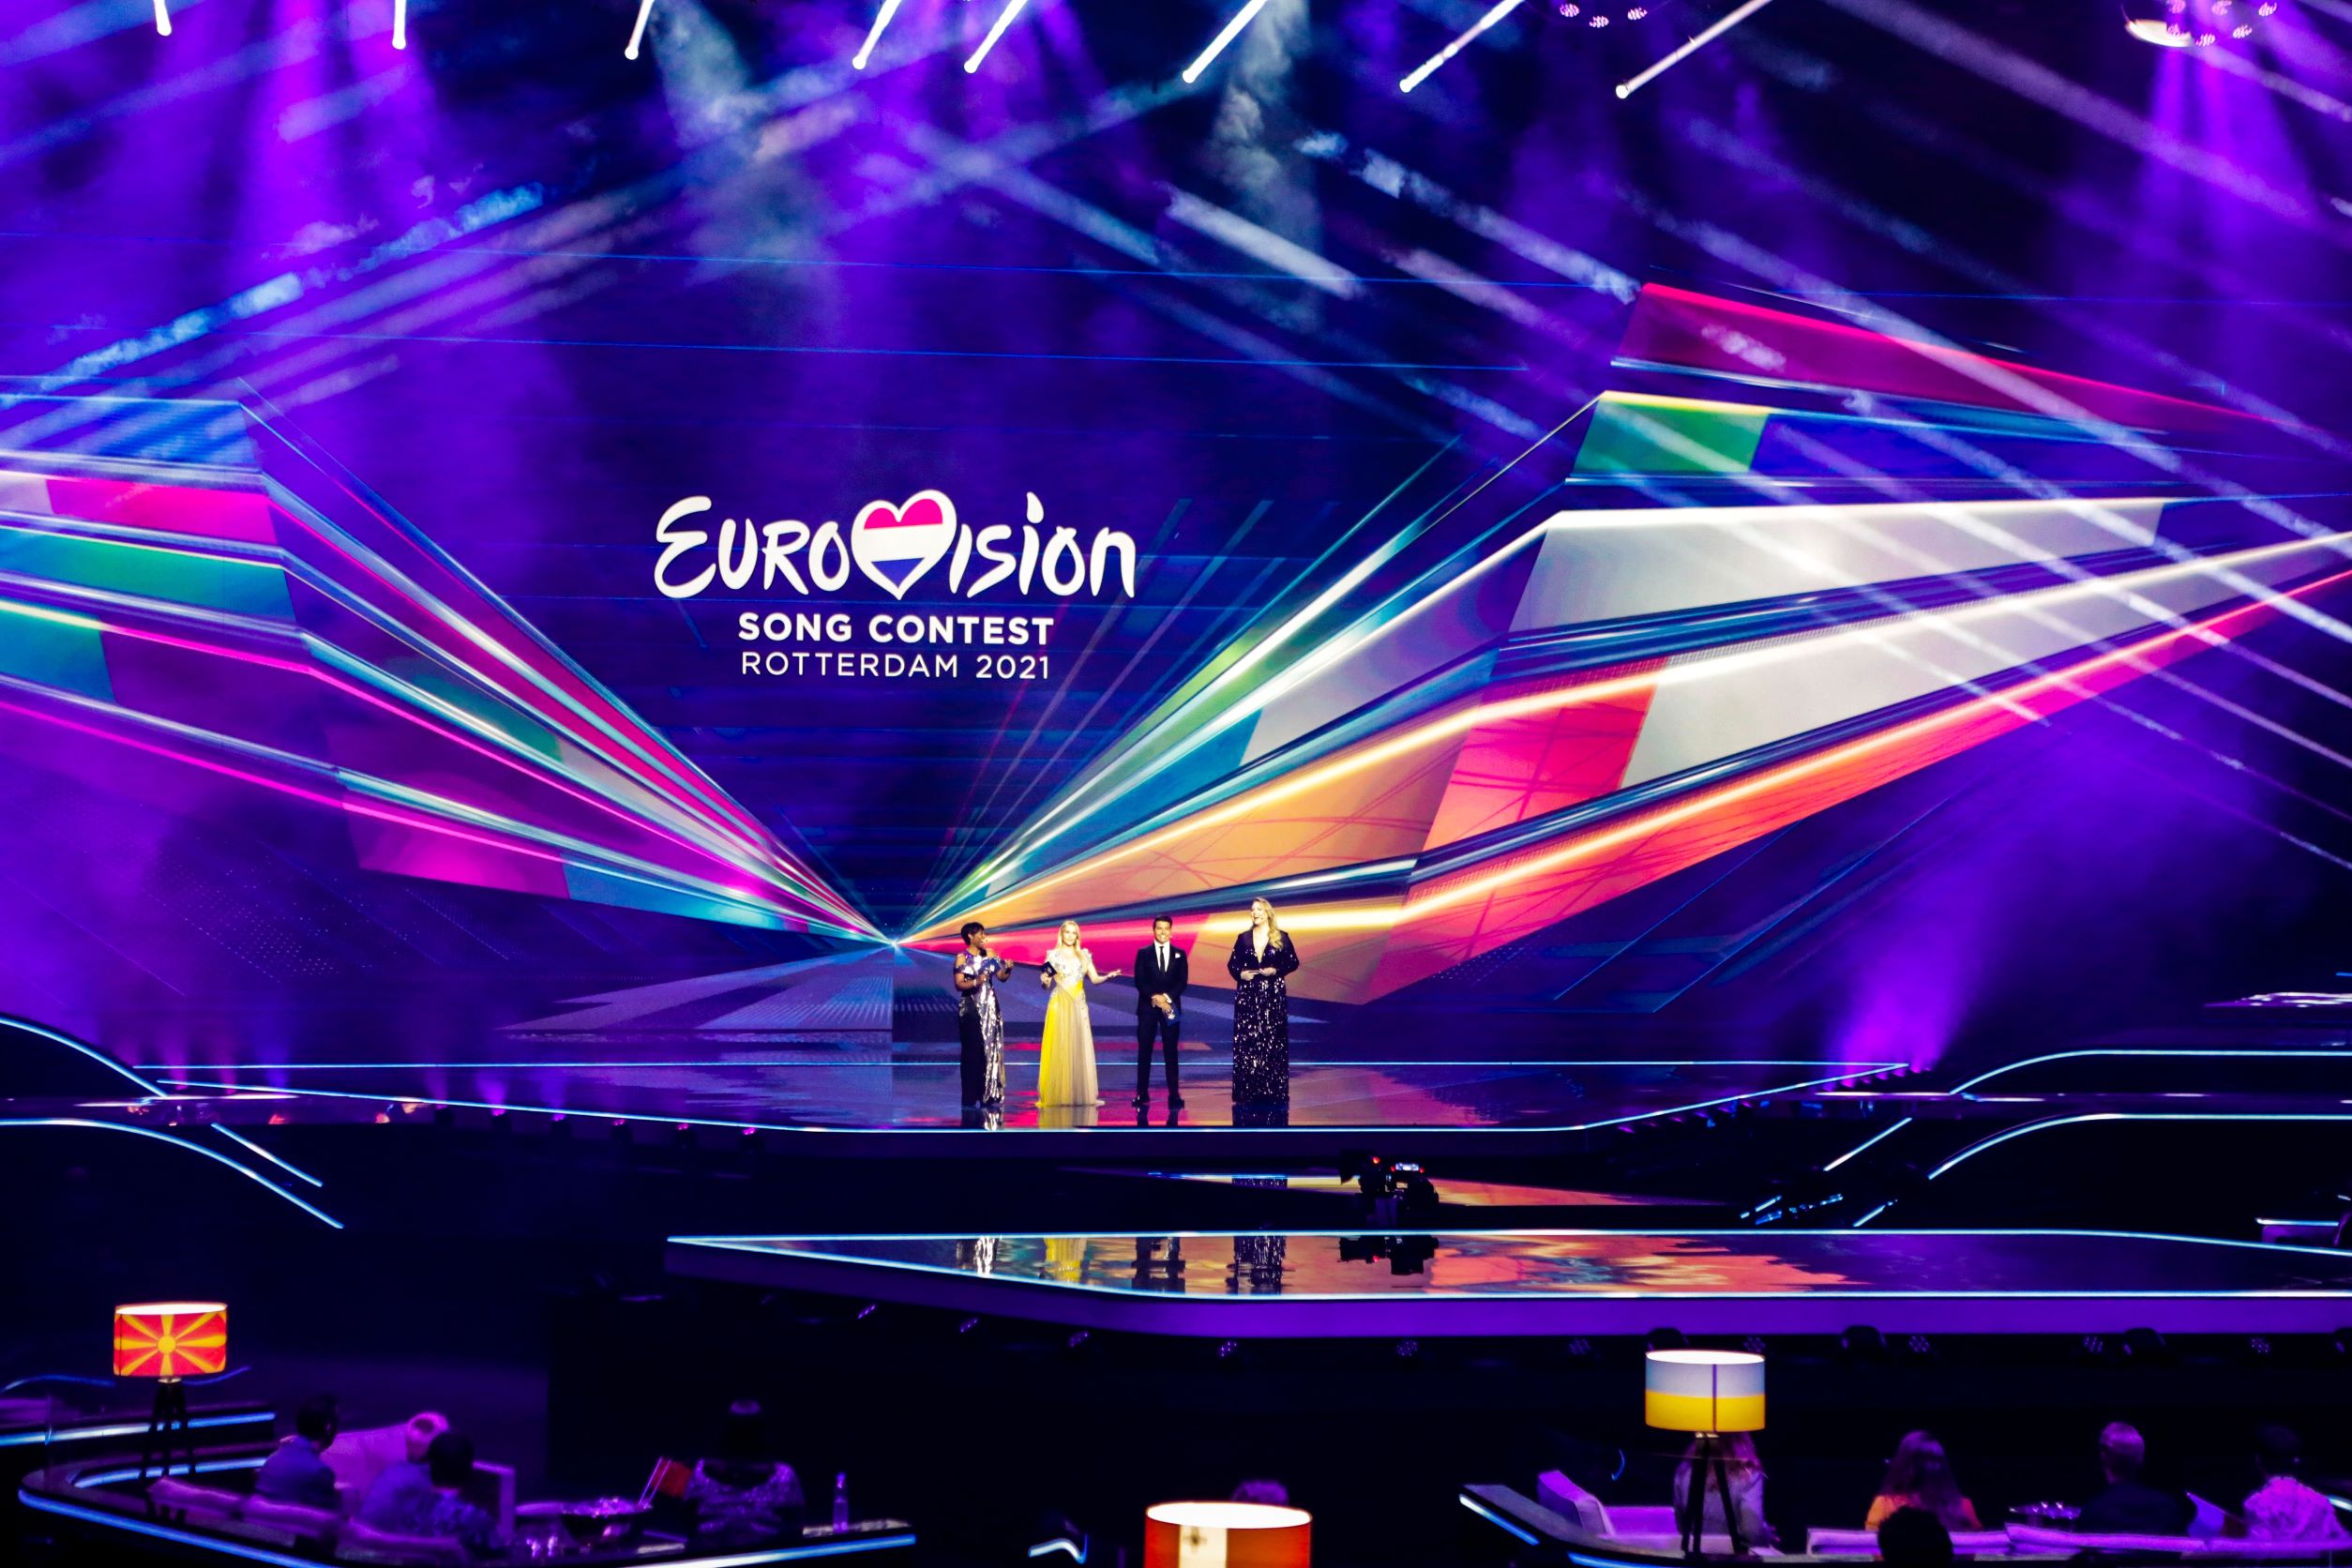 Eurovision Song Contest in Rotterdam on May 18, 2021 (by EBU)